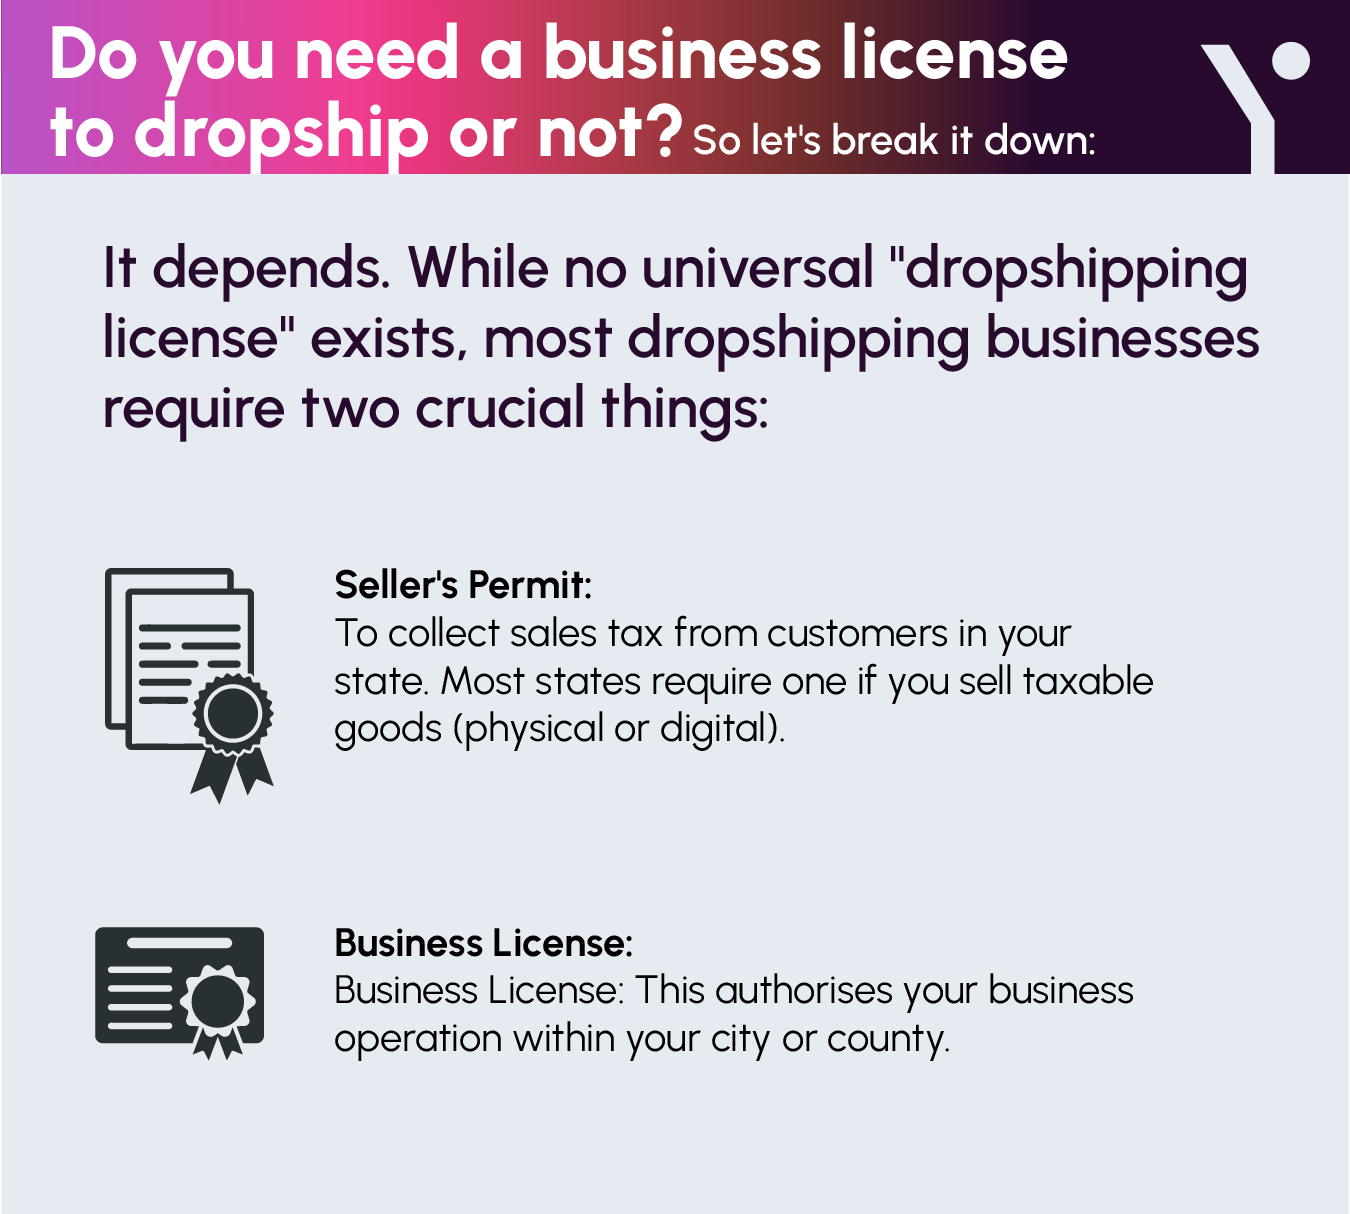 Key pointers of Legal Essentials Do You Need a Business License to Dropship in infographic form